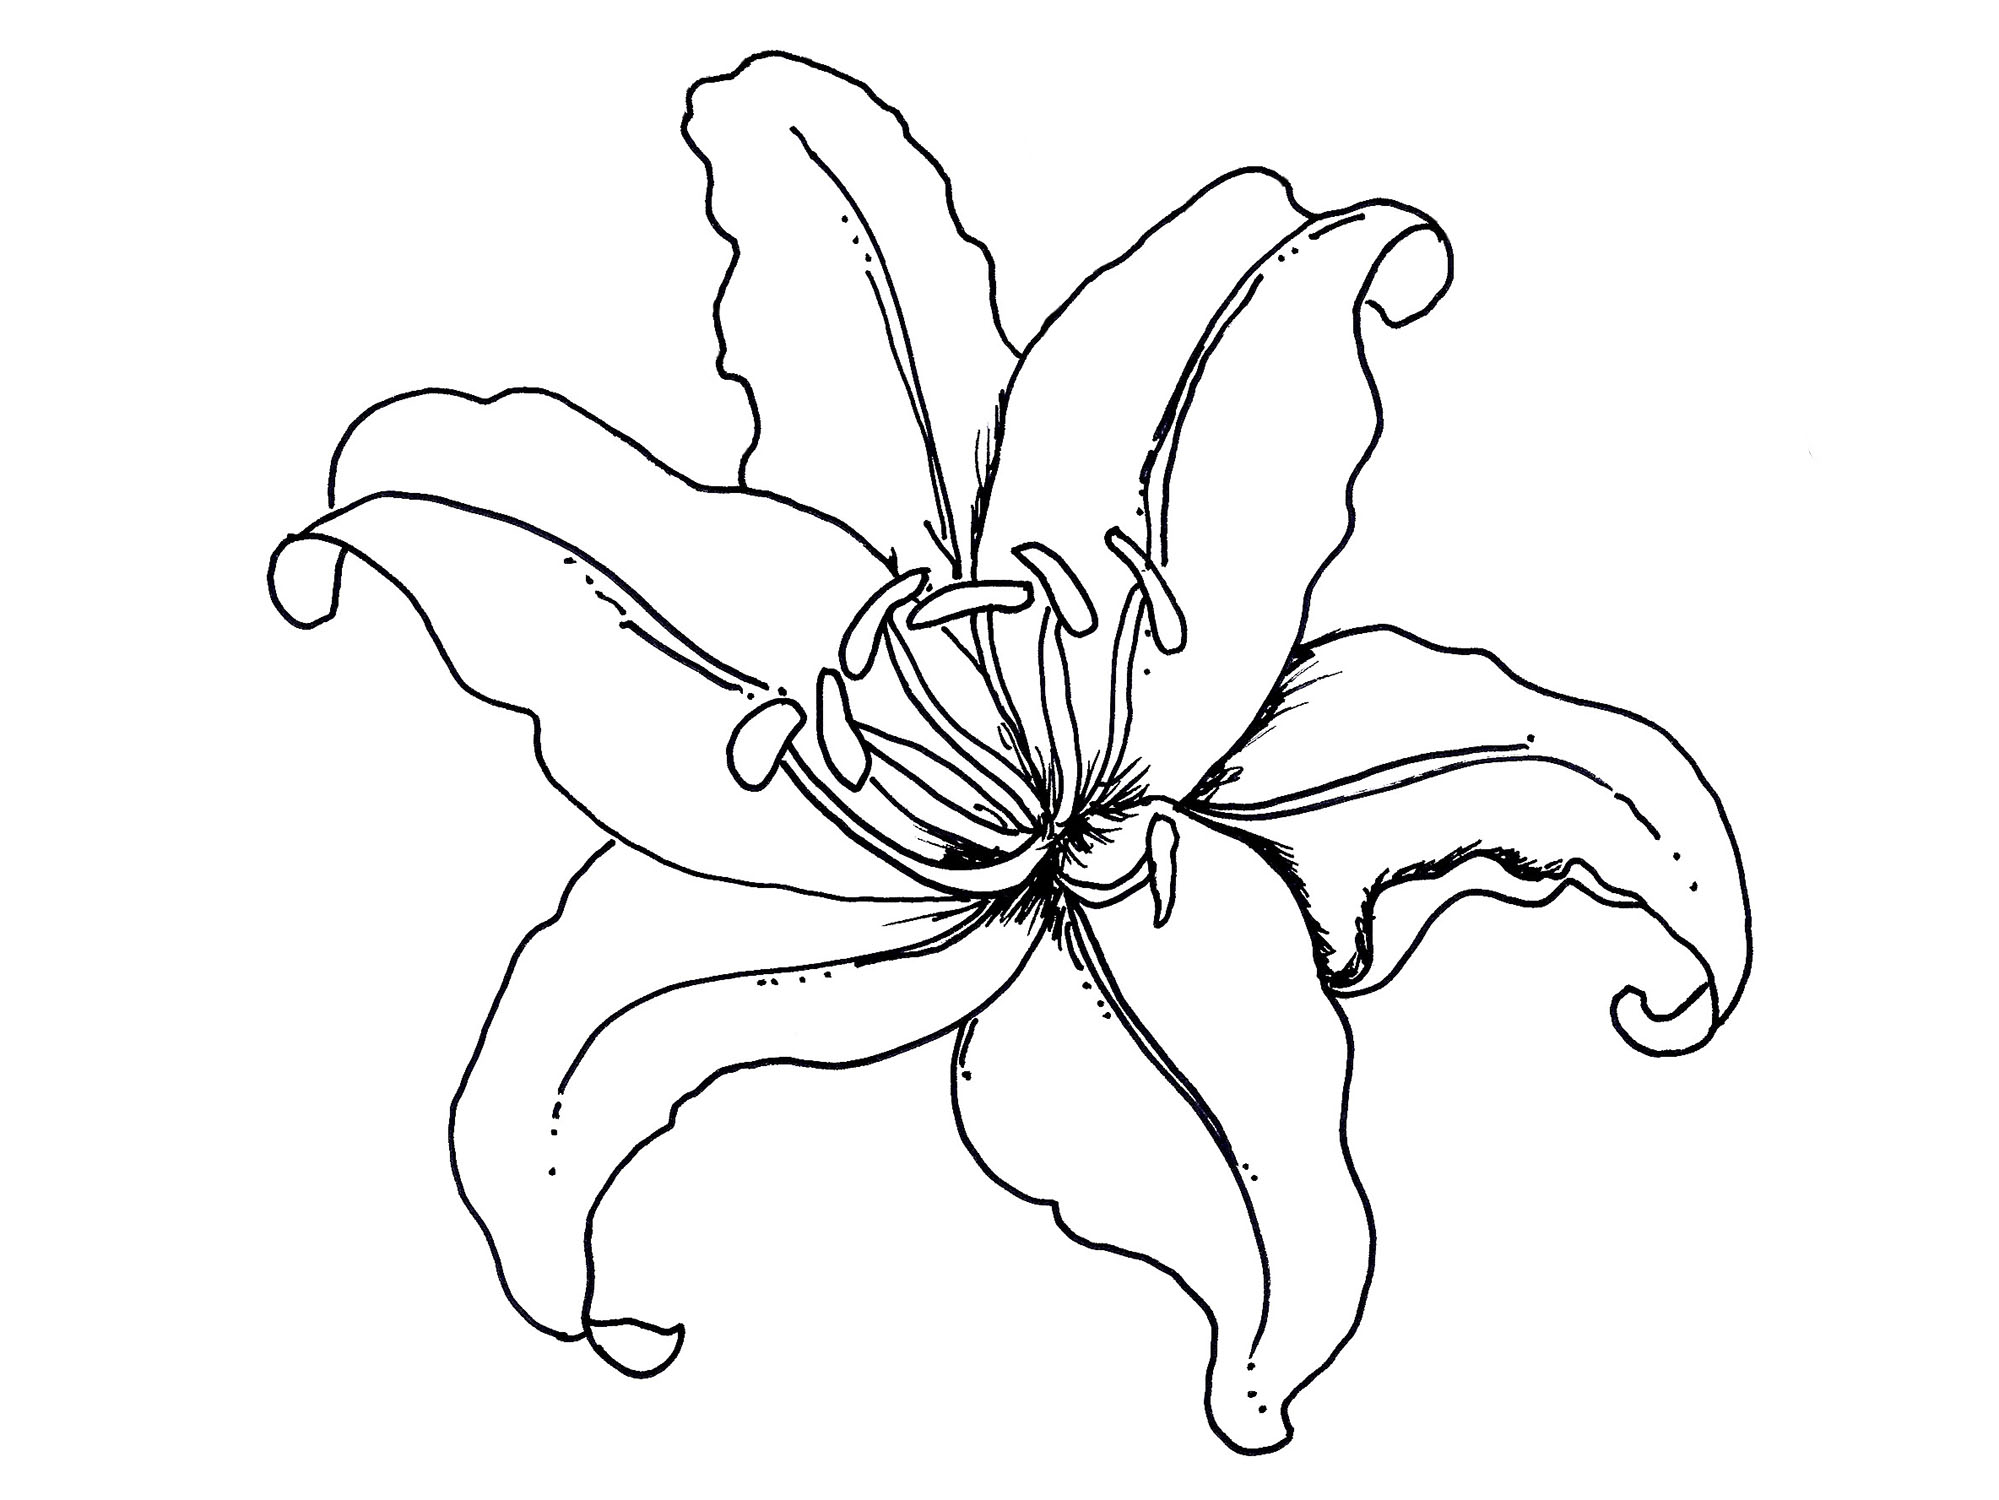 Lily flower outline for second tattoo.